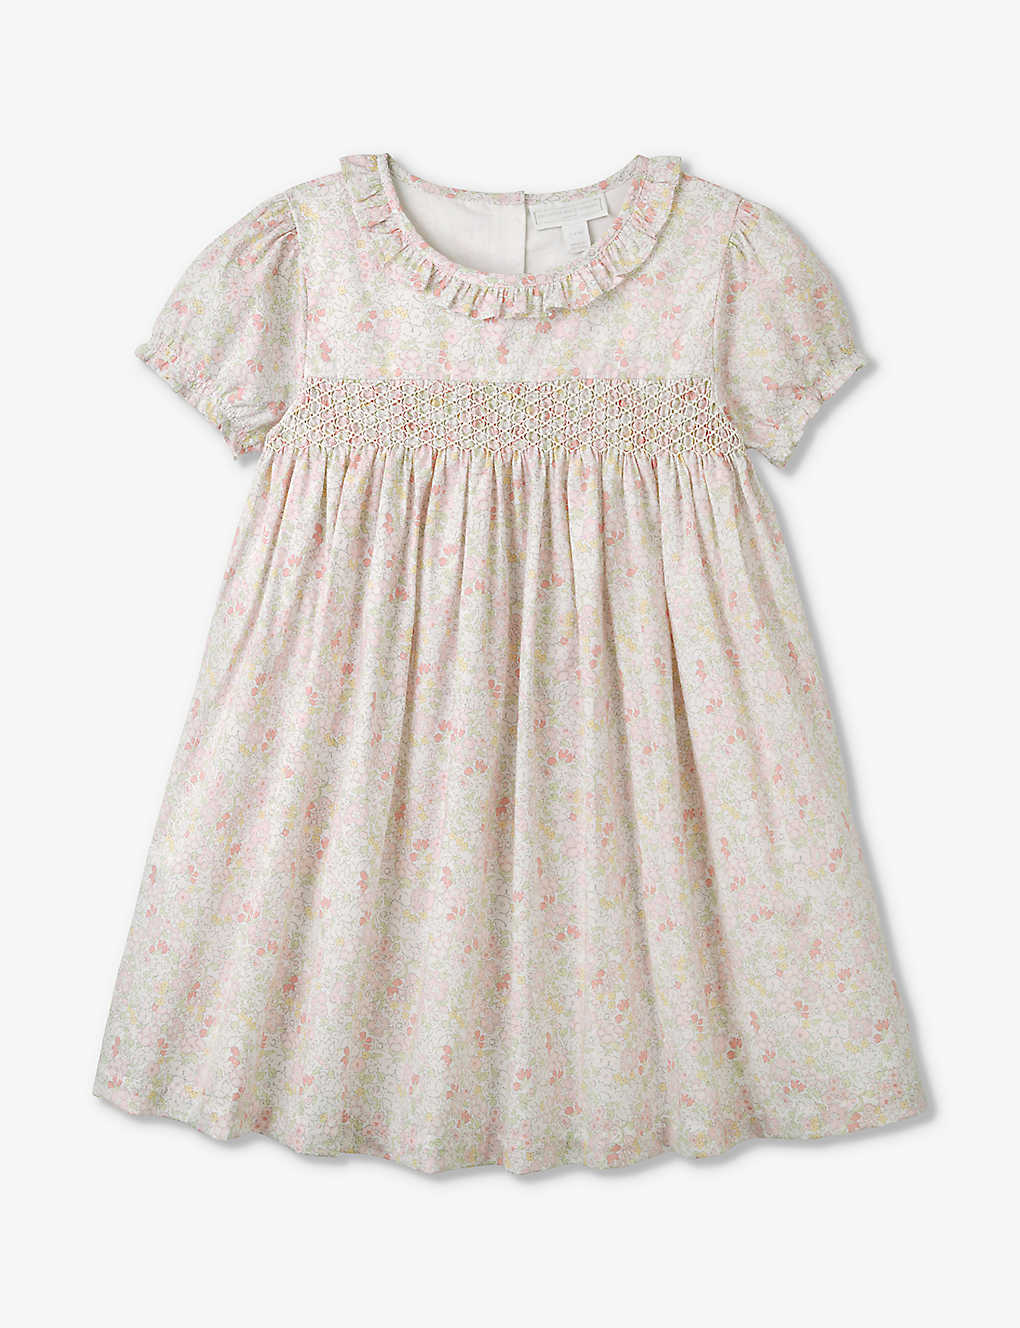 The Little White Company Babies'  Multi Petunia Hand-smocked Organic-cotton Dress 18 Months - 6 Years